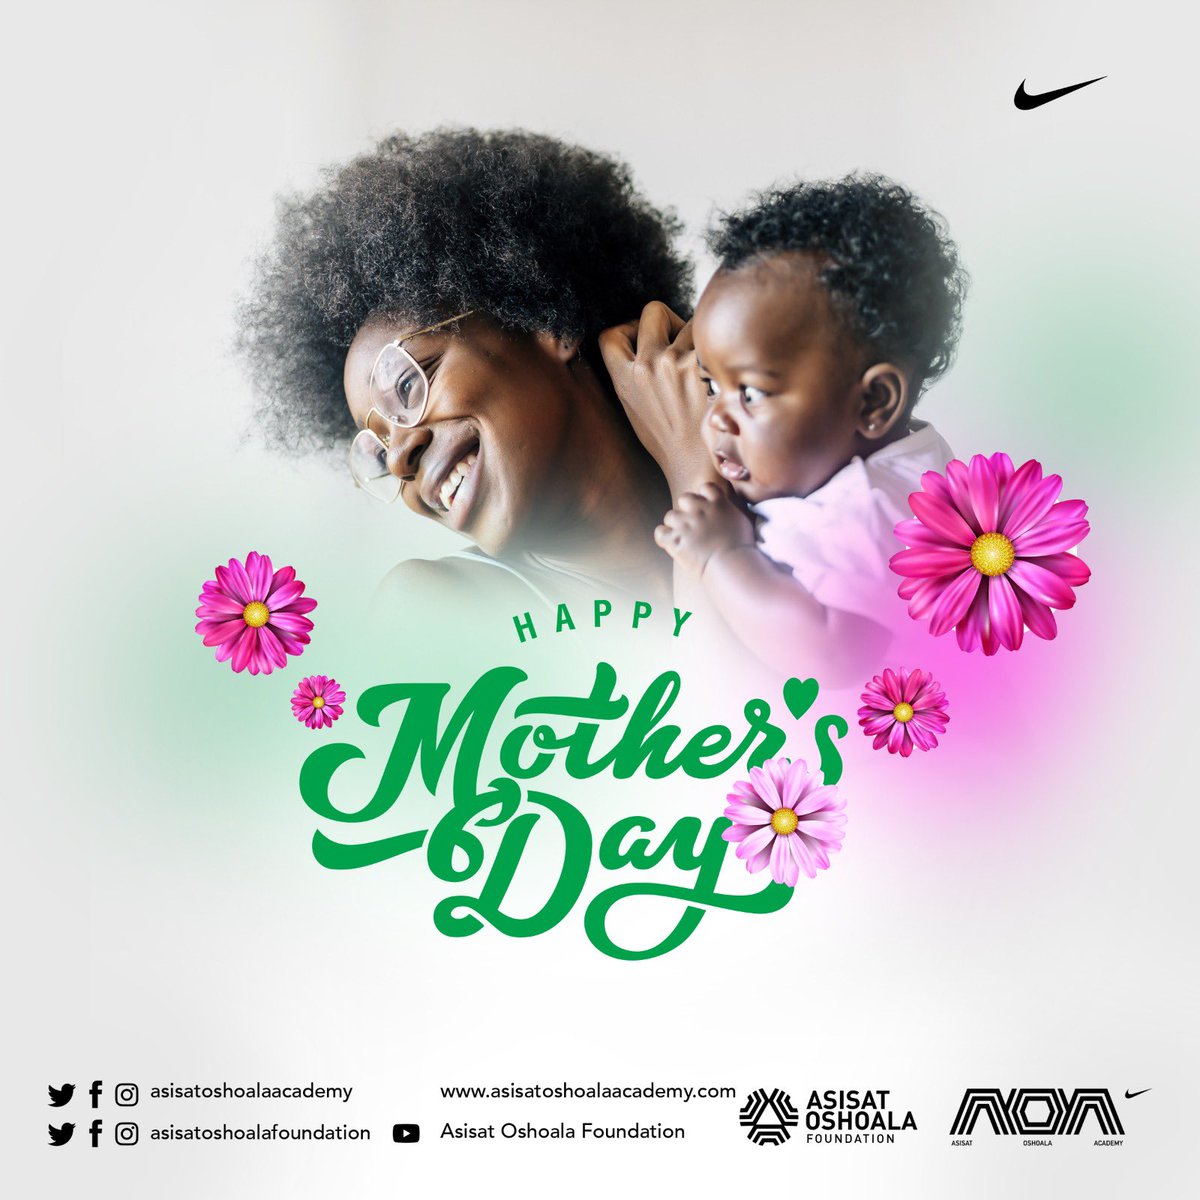 The @AOAcademy family wishes all the incredible moms out there a happy Mother's Day 💚👆 #AoaGirls #MothersDay